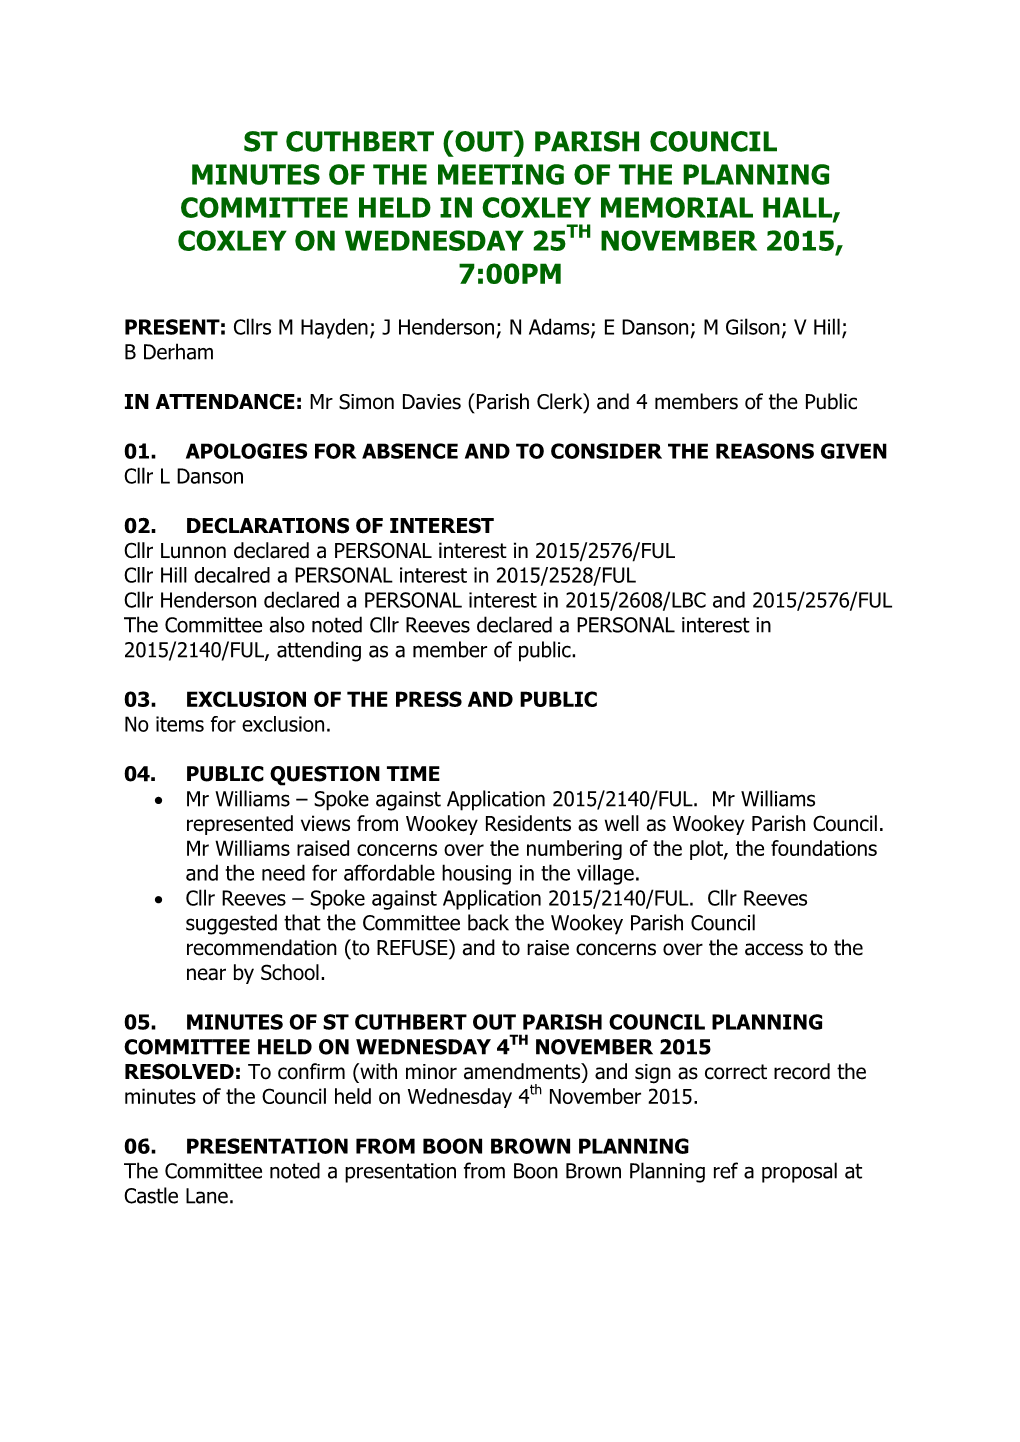 St Cuthbert (Out) Parish Council Minutes of the Meeting of the Planning Committee Held in Coxley Memorial Hall, Coxley on Wednesday 25Th November 2015, 7:00Pm